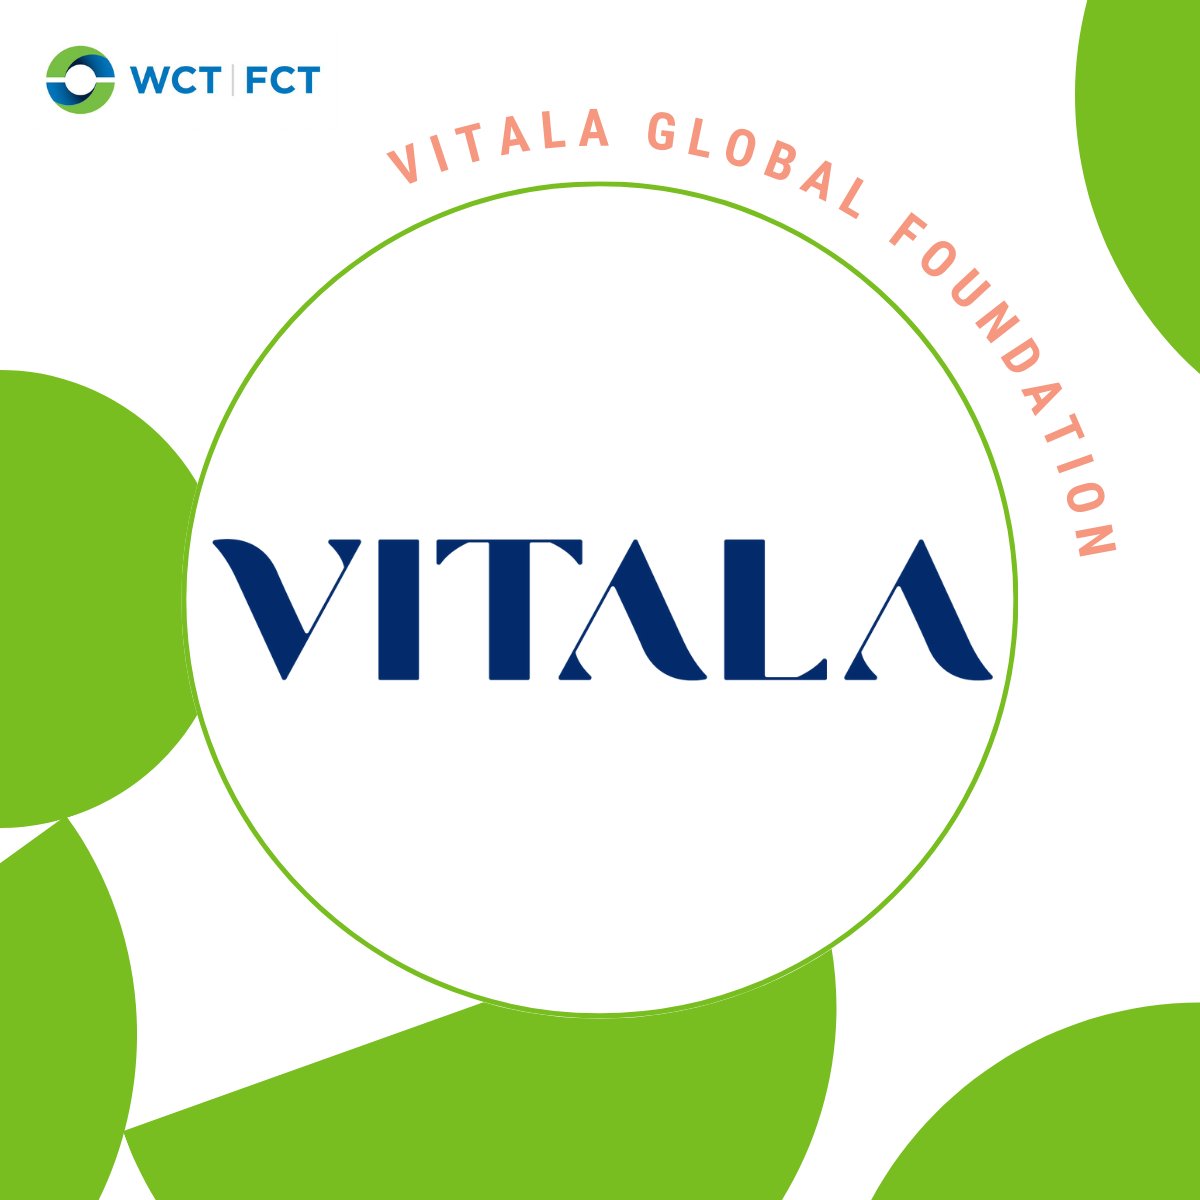 Building Gender Equity Worldwide: Vitala Global is making a significant impact in the fight for gender equity, not just in Canada but across the globe! They are committed to empowering women by providing access to education, healthcare, and economic opportunities.